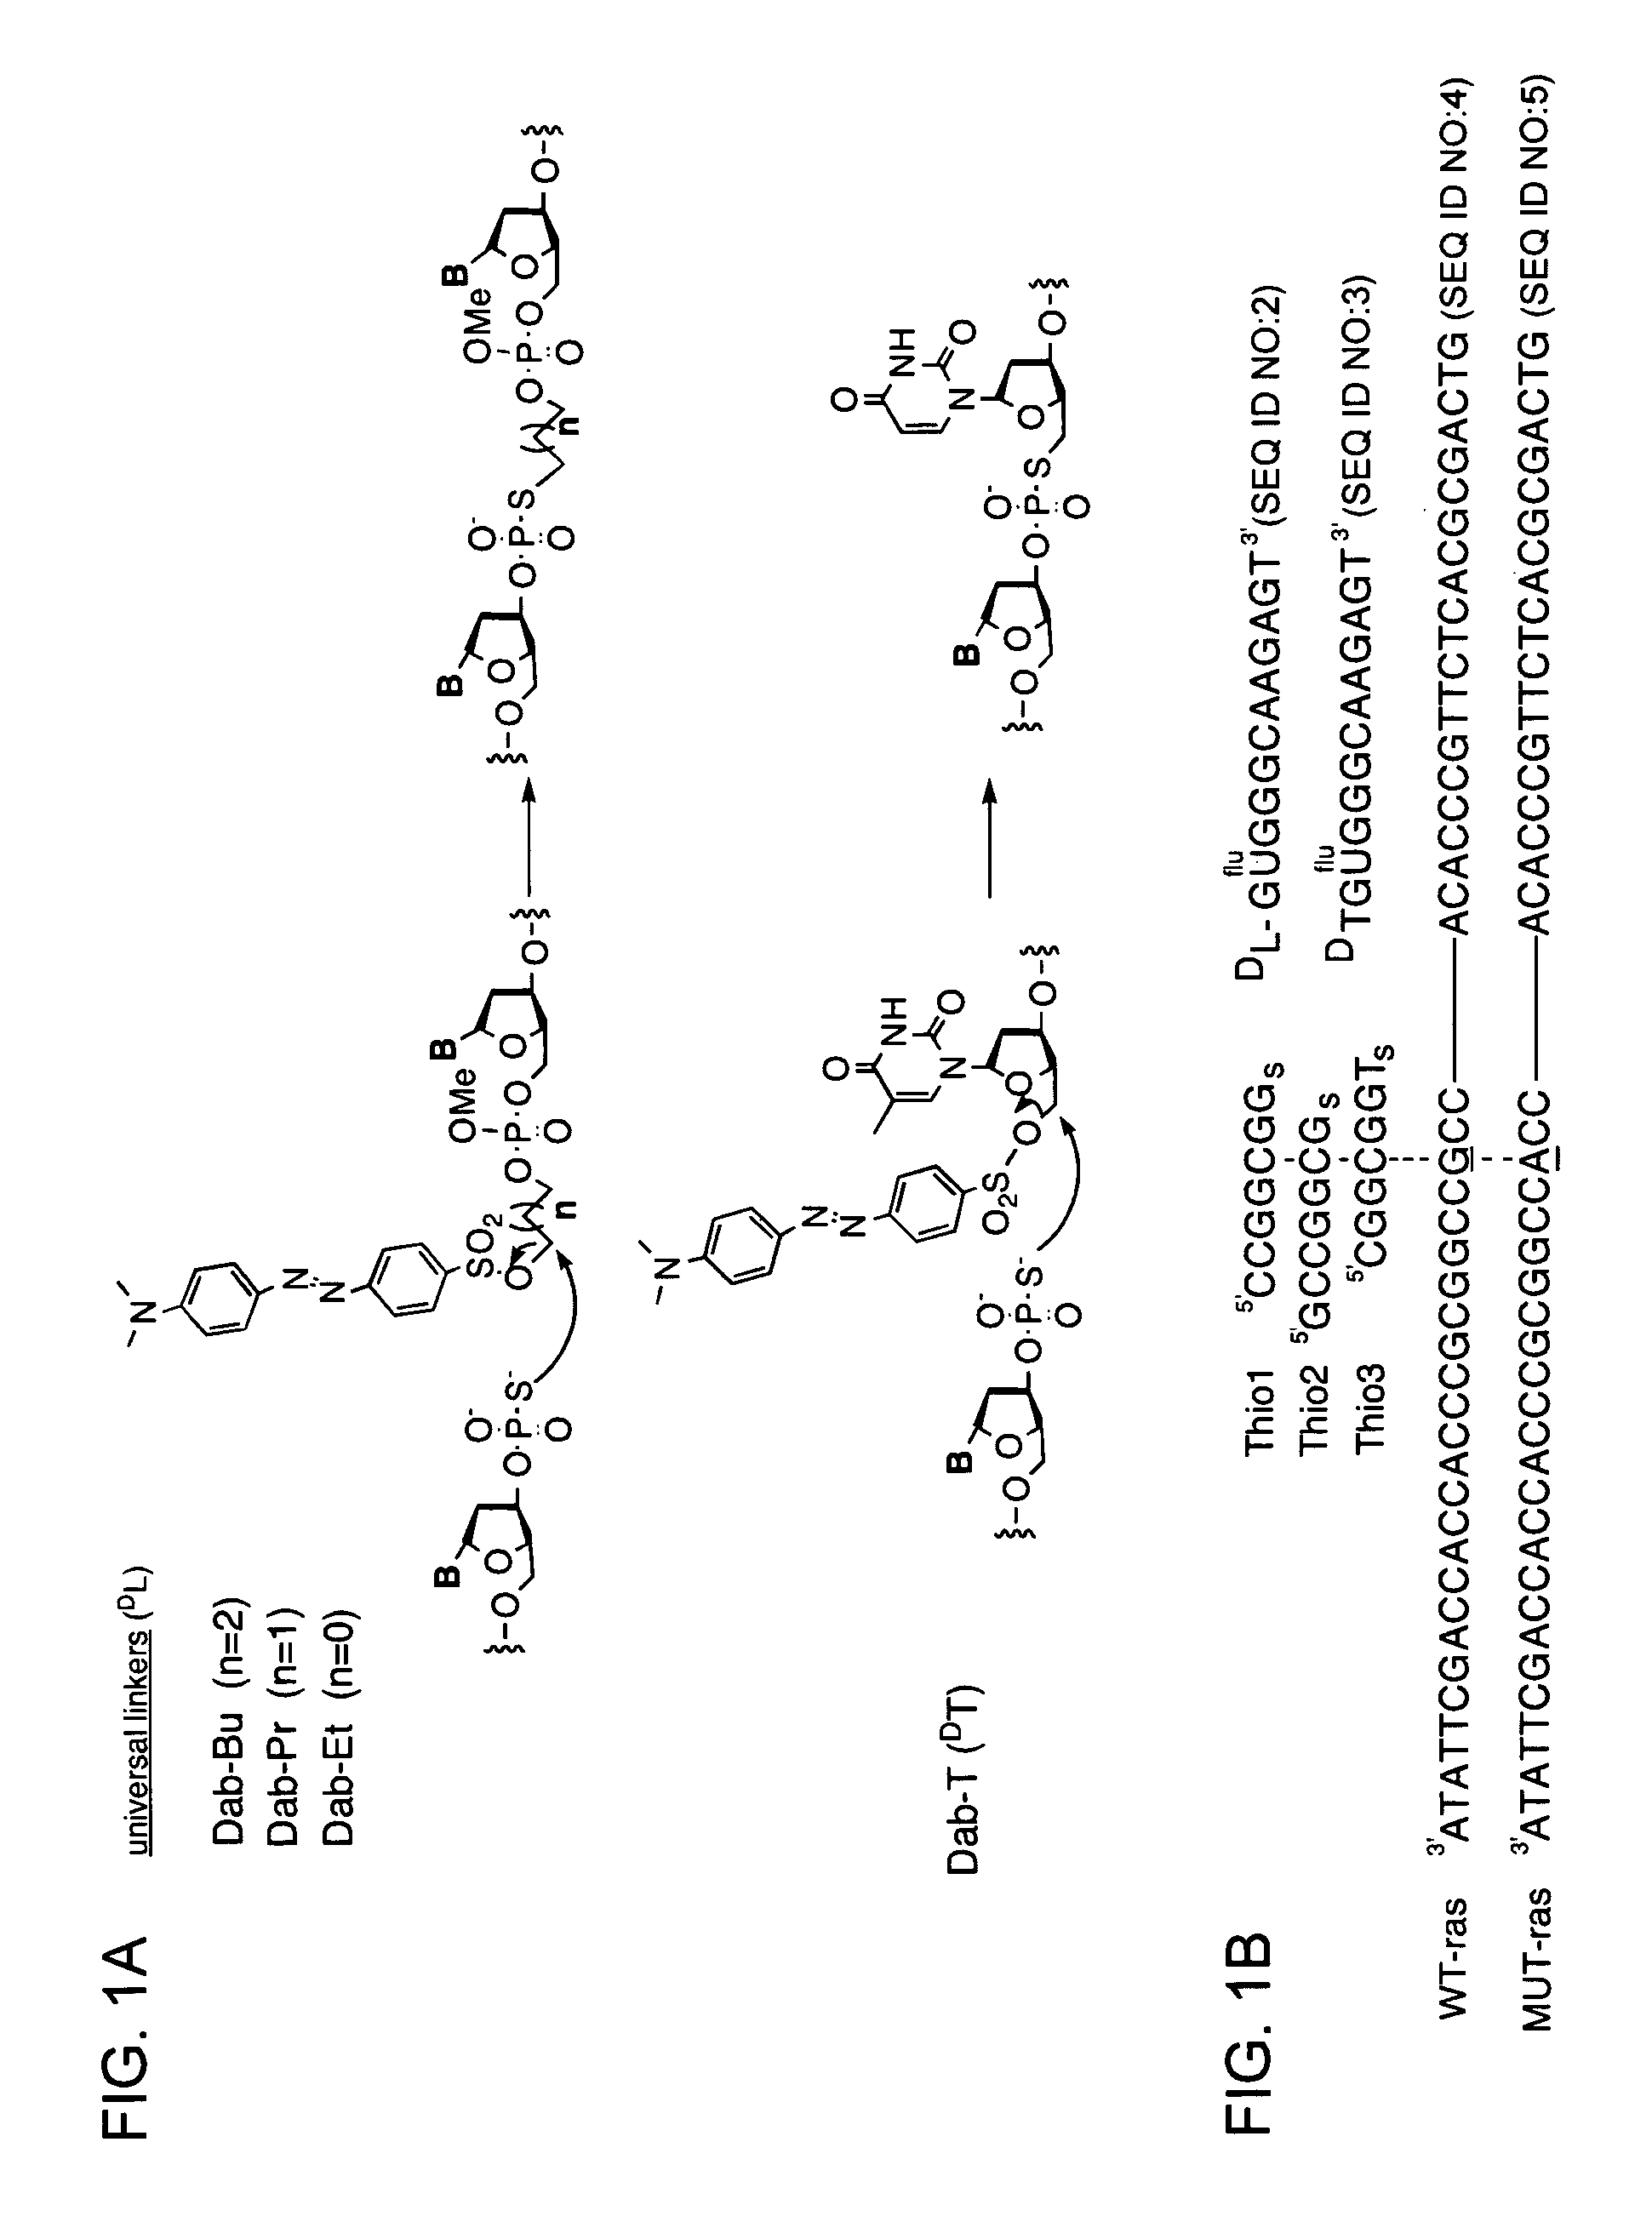 Universal linker compositions for the release or transfer of chemical agents from a polynucleotide